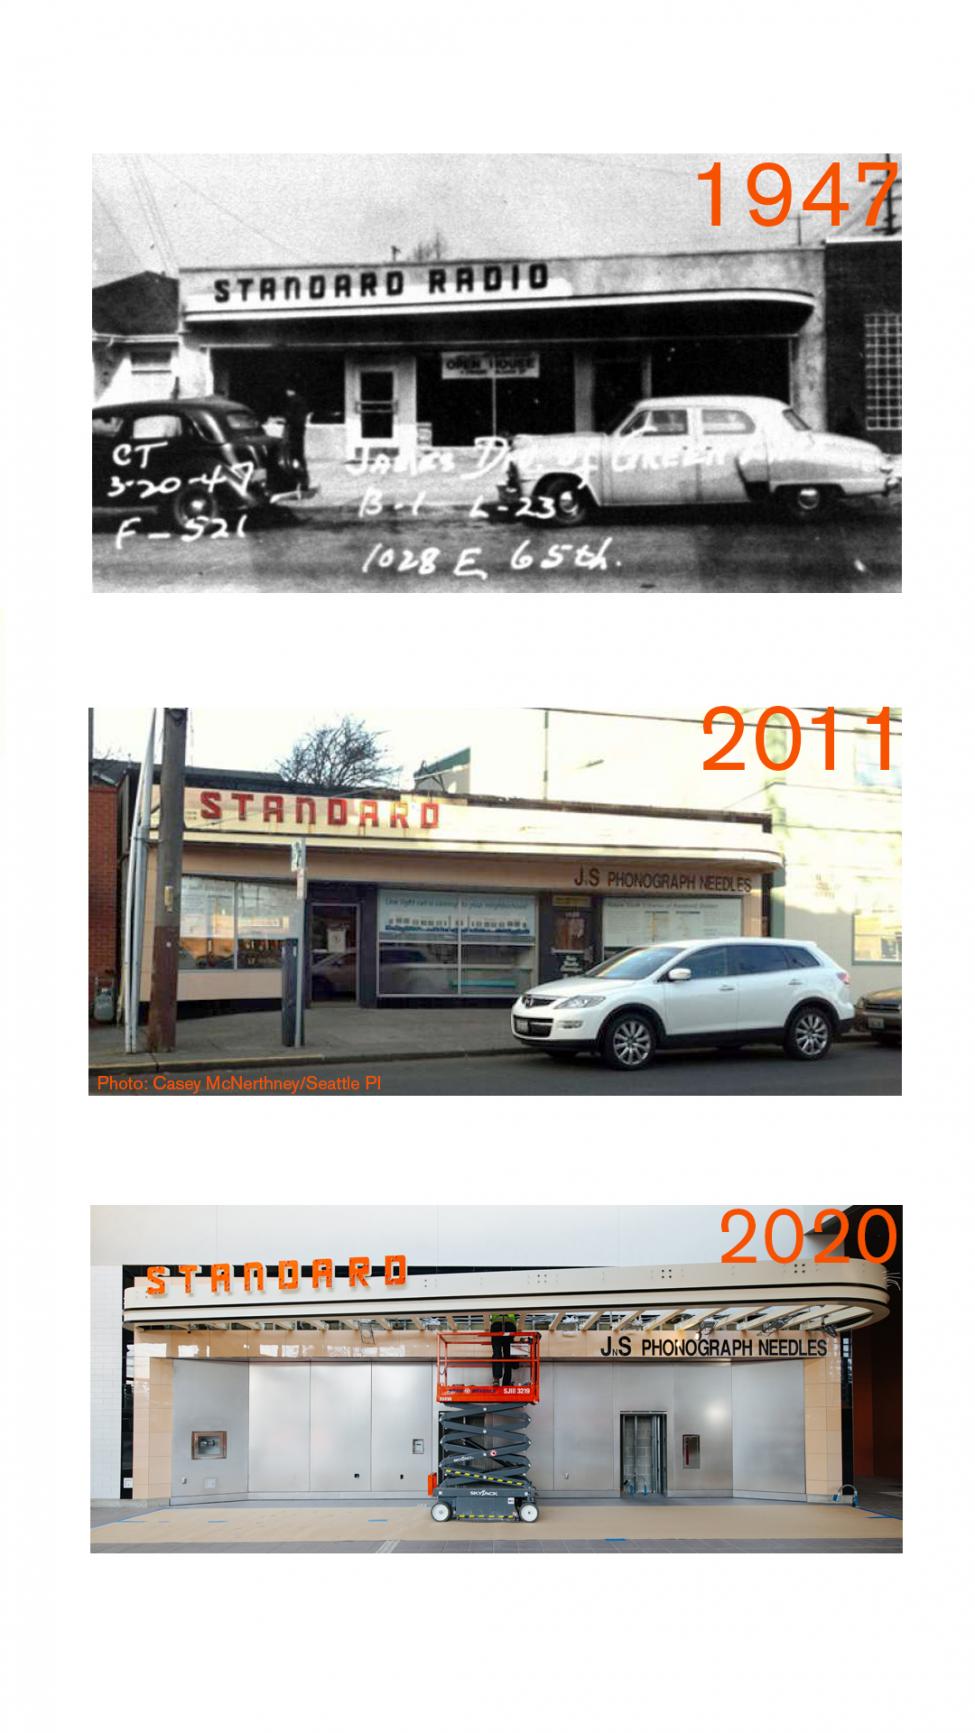 Photos of the Standard Radio sign in 1947, 2011 and 2020.